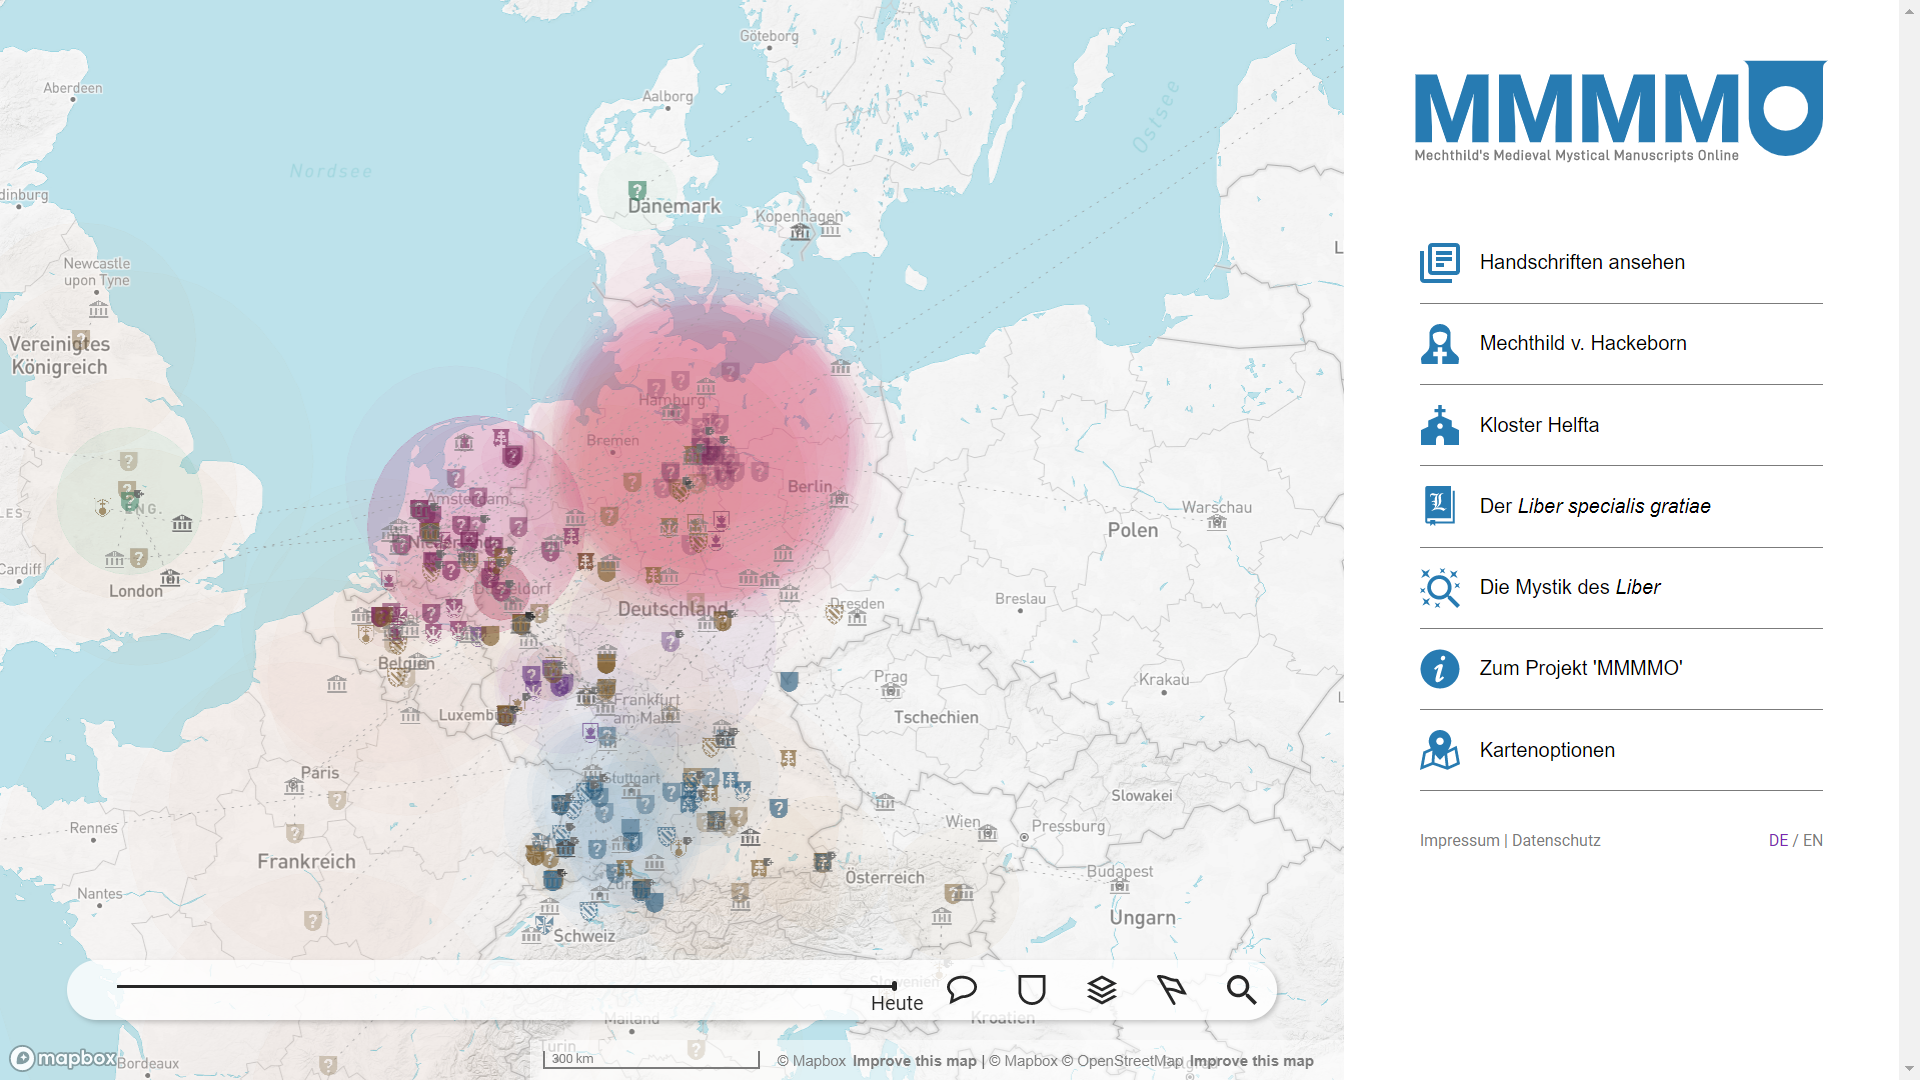 Screenshot of MMMMO. The map section shows central Europe, overlayed with numerous map features. Crests of monastic orders are displayed as icons to show the location and the belonging of each manuscript. The icons are of different colors, some have half-transparent circles around them and some are connected by solid, dashed or dotted lines. At the bottom of the screen is a taskbar with a timeline slider and several icons to filter the displayed features. At the right side of the screen is a sidebar that displays the title and additional information.